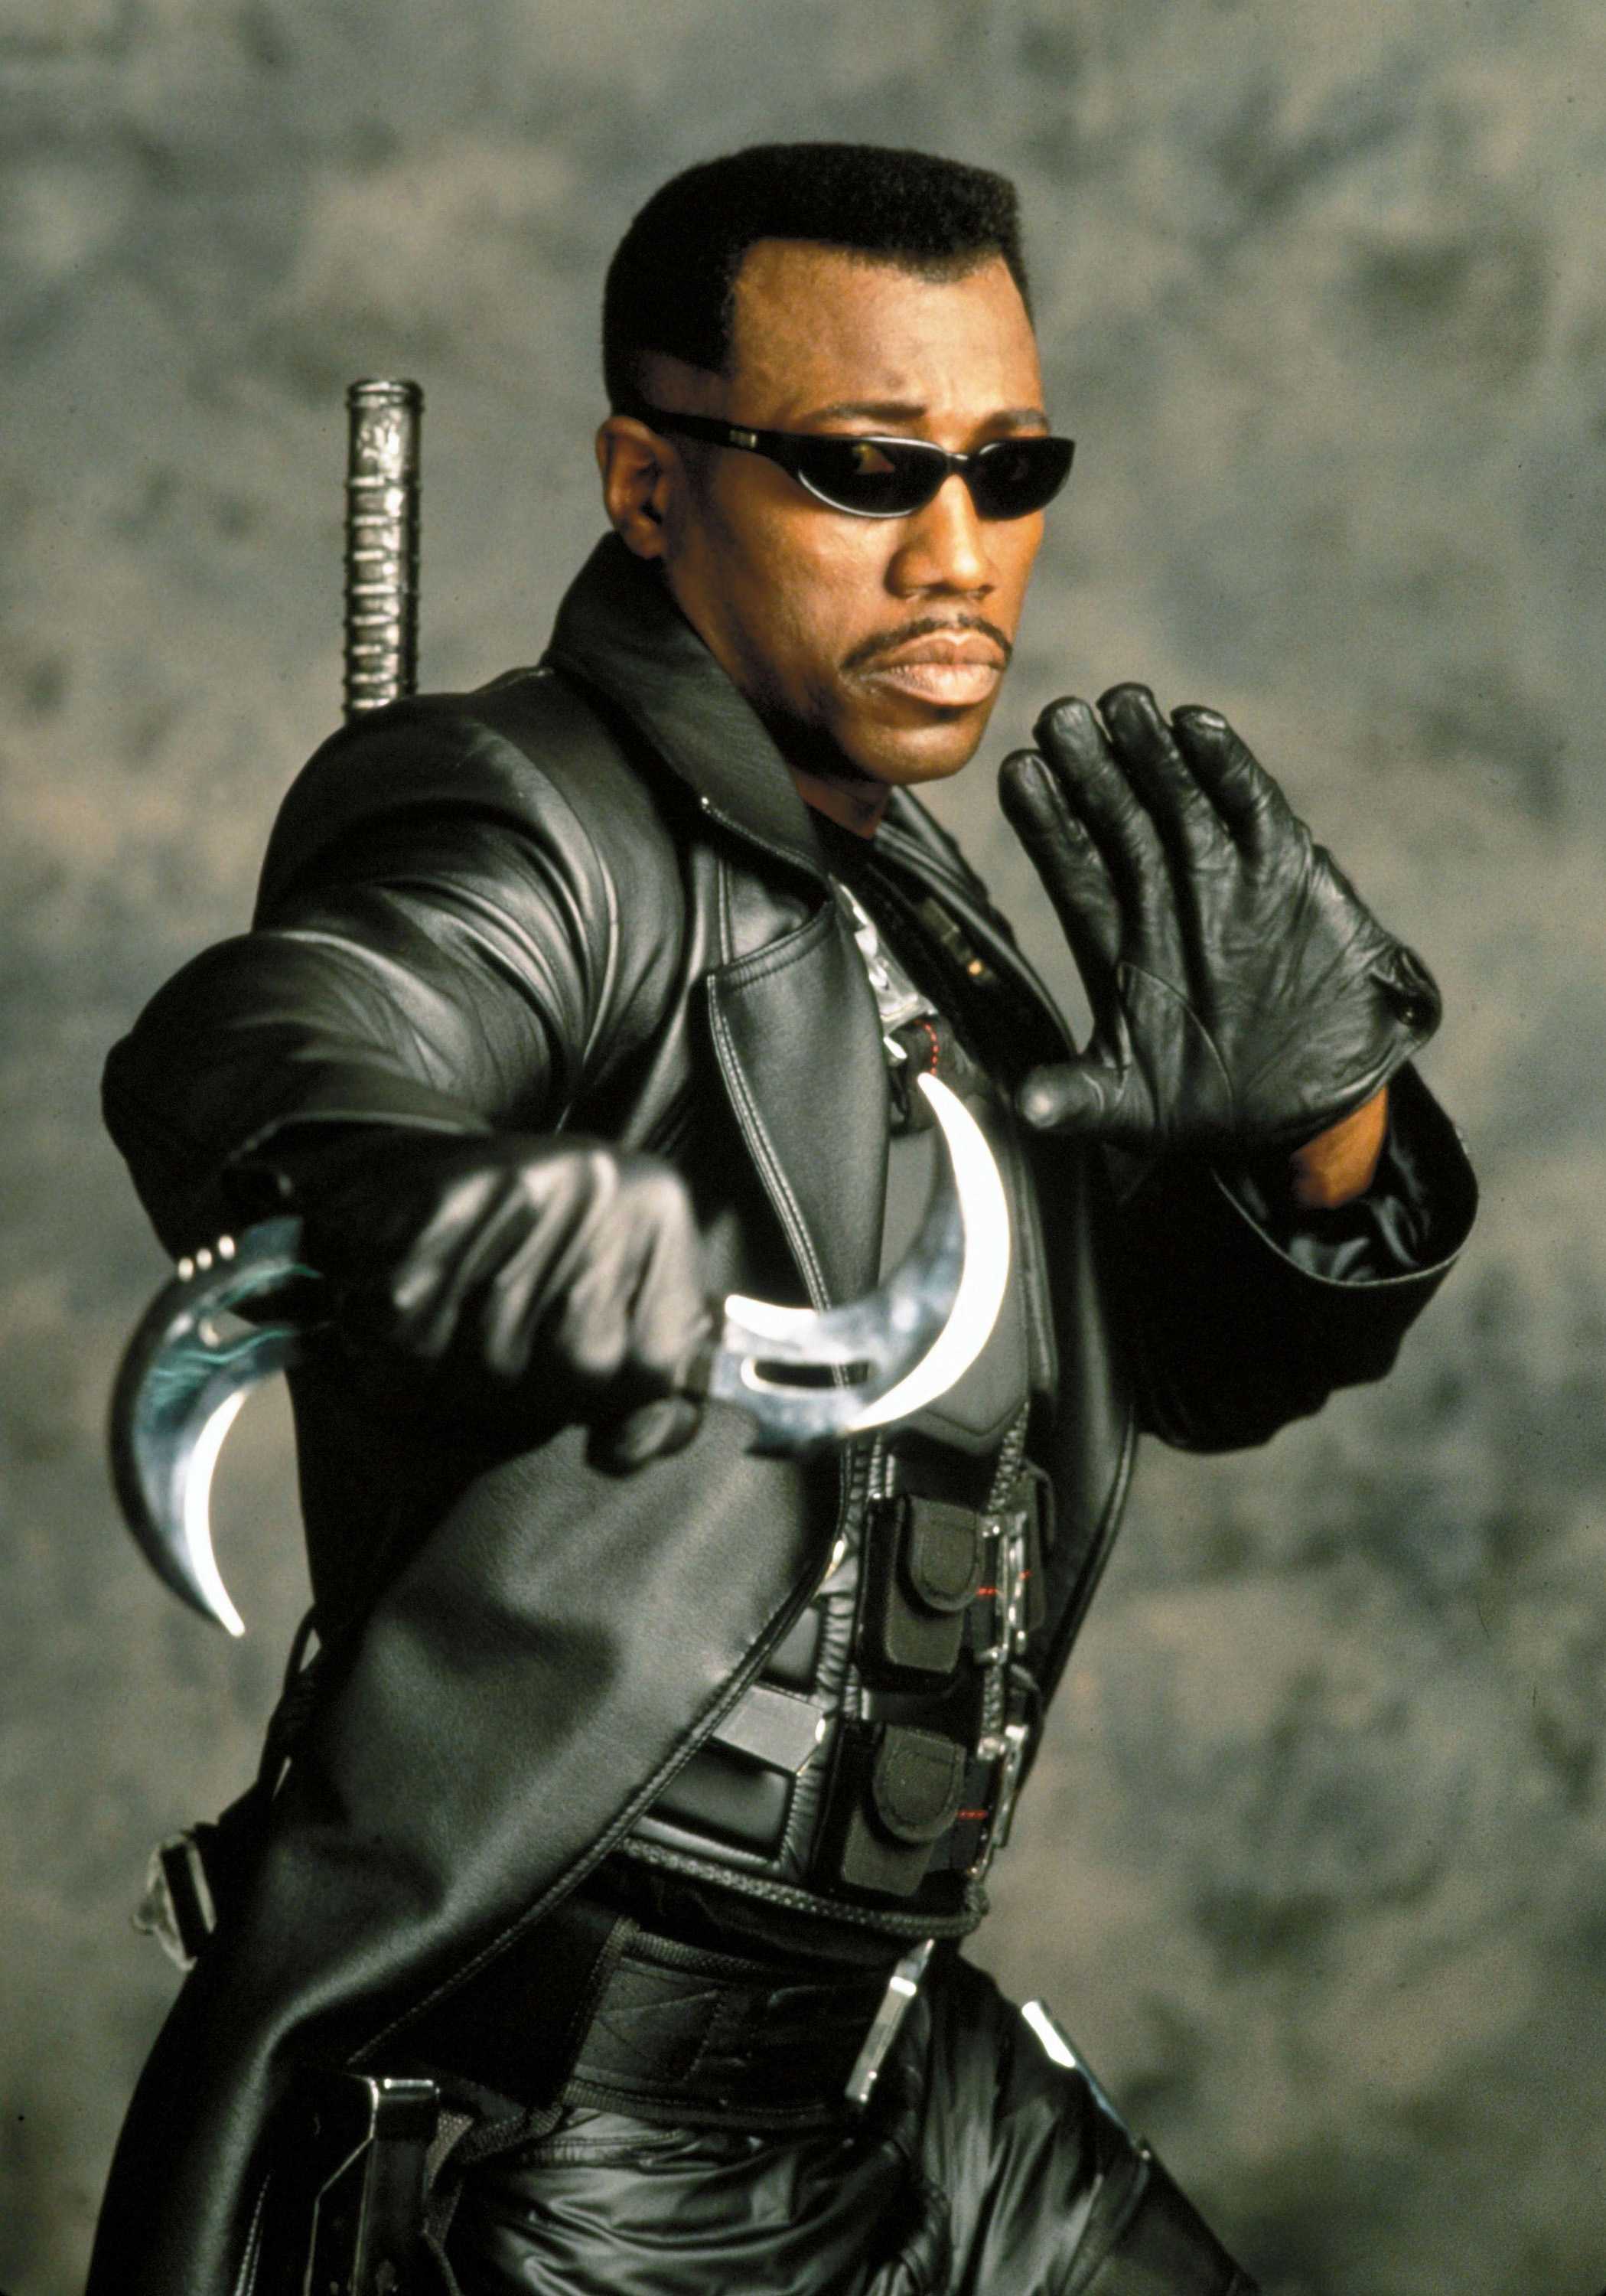 Wesley Snipes, as Blade, poses ready for action. He is dressed in all black and has small cuved blade in his hand.